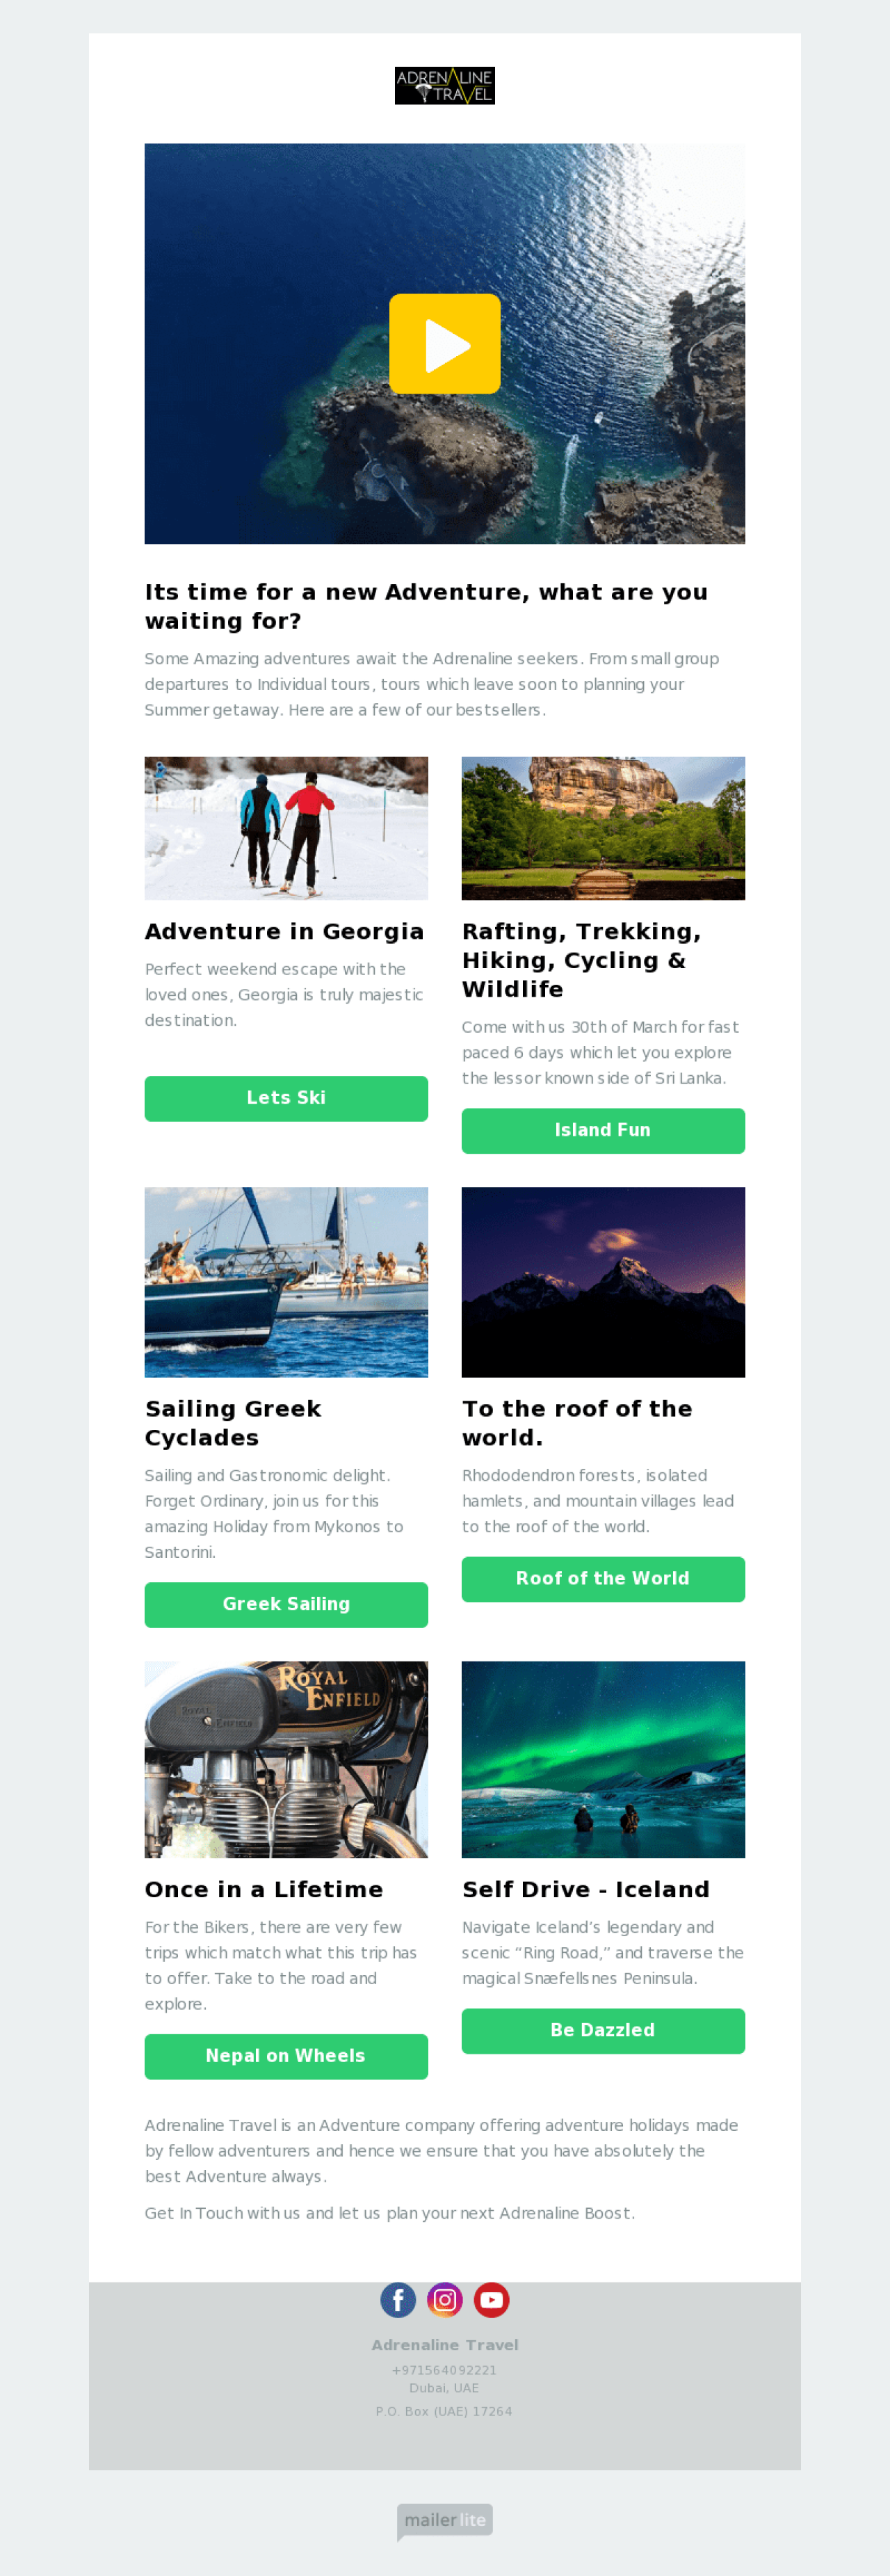 Adrenaline Travel example - Made with MailerLite